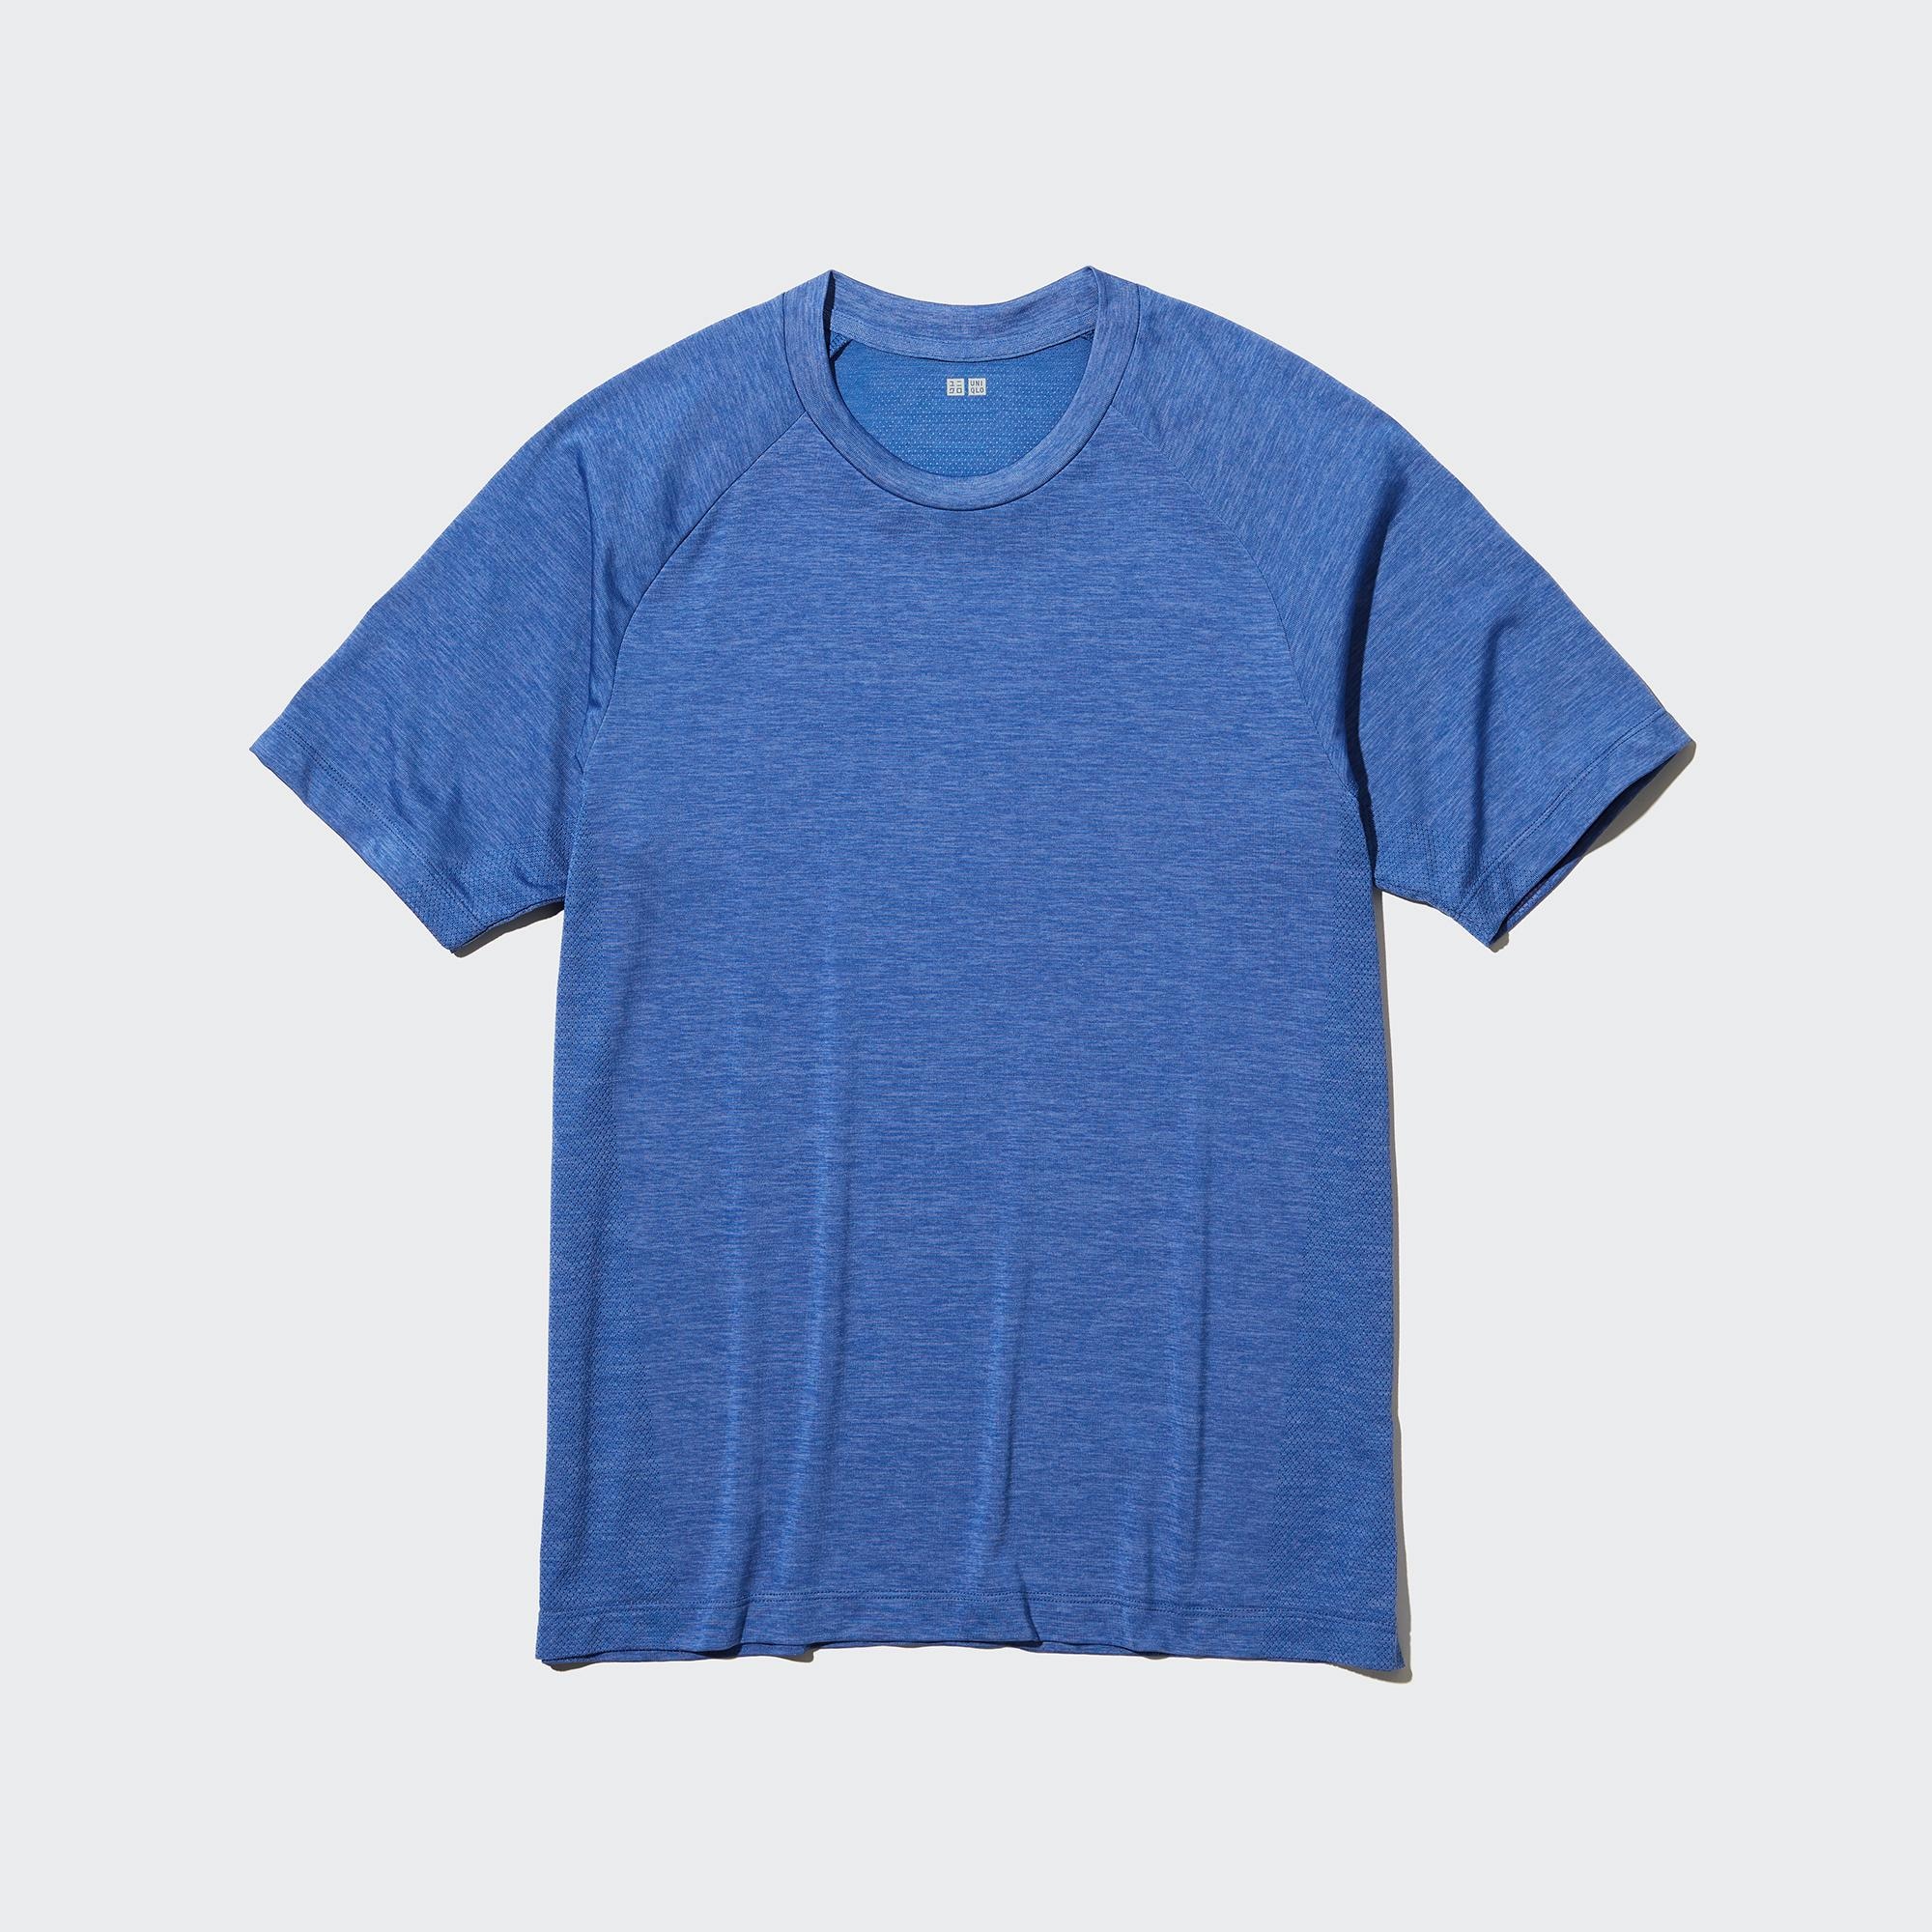 DRY-EX Mapping Printed Crew Neck Short-Sleeve T-Shirt | UNIQLO US